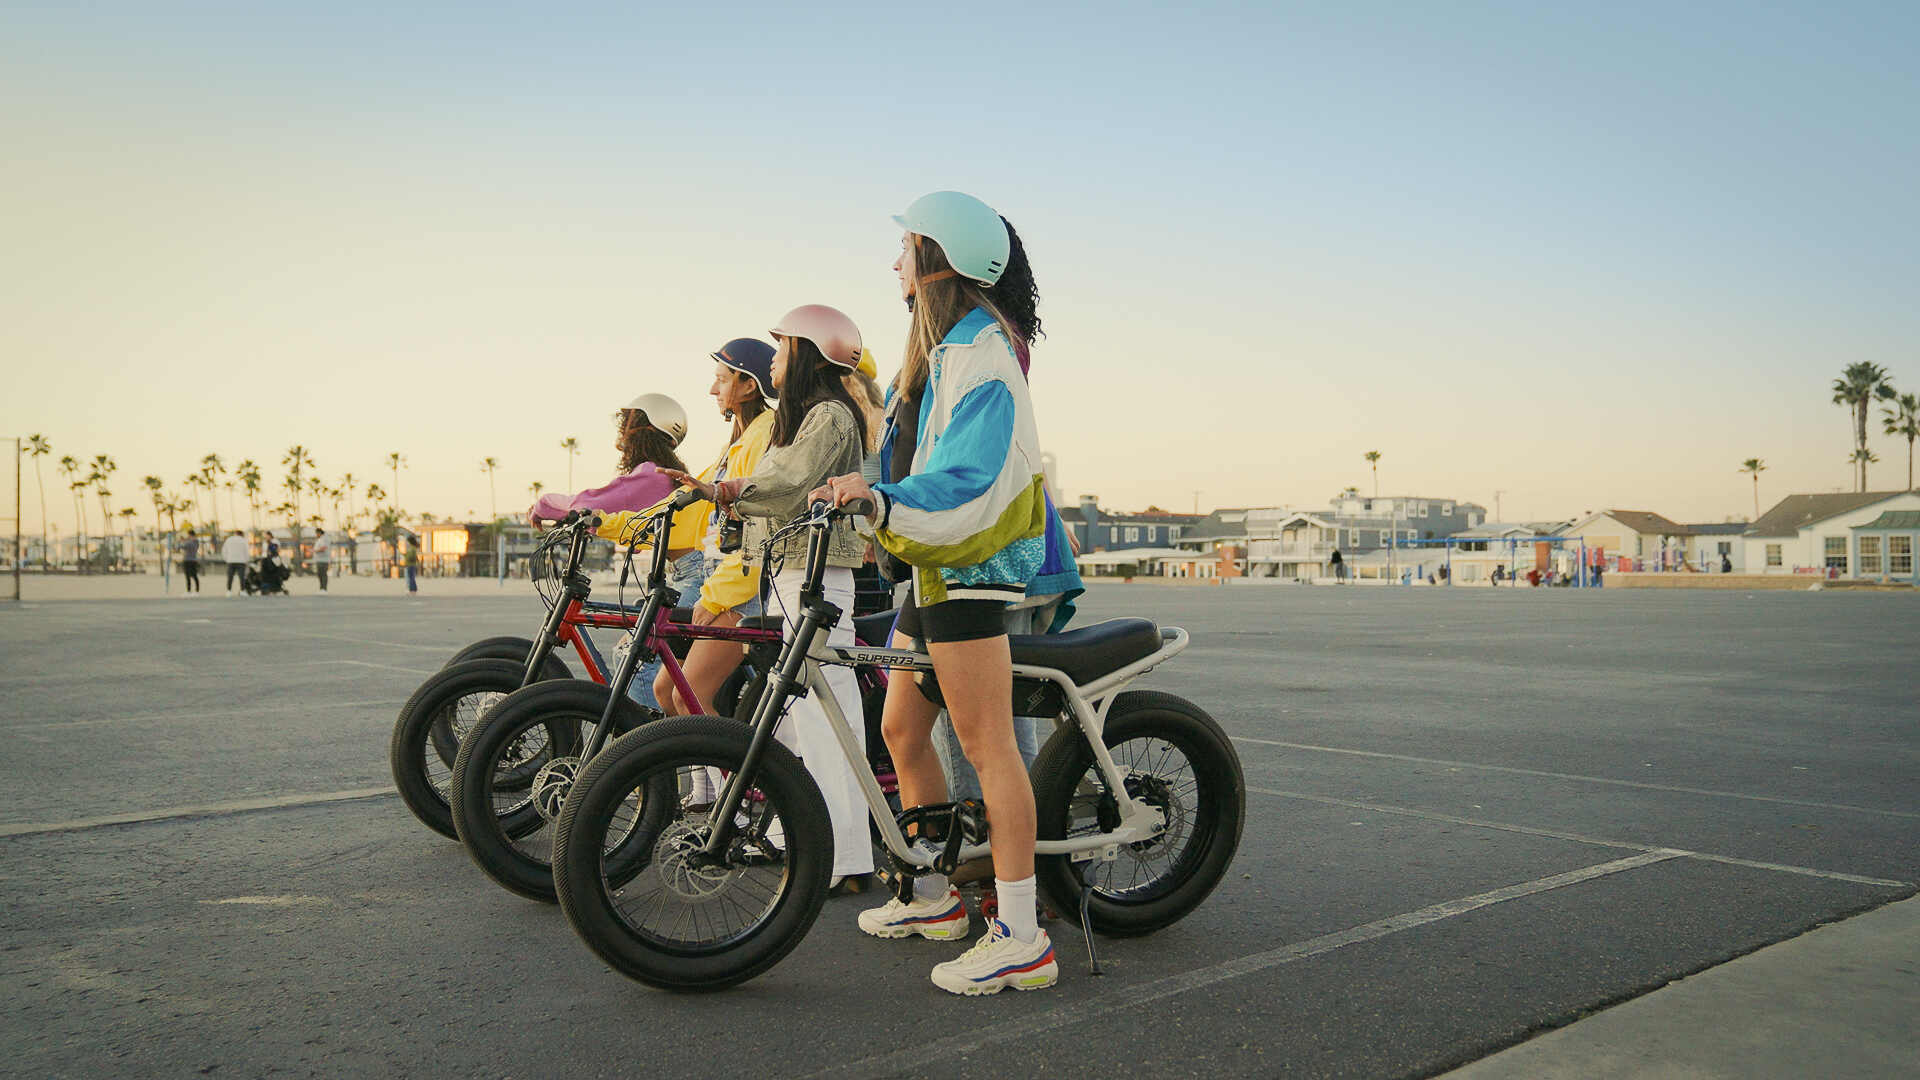 A group of girls getting ready to ride their Super73-Z Miami ebikes